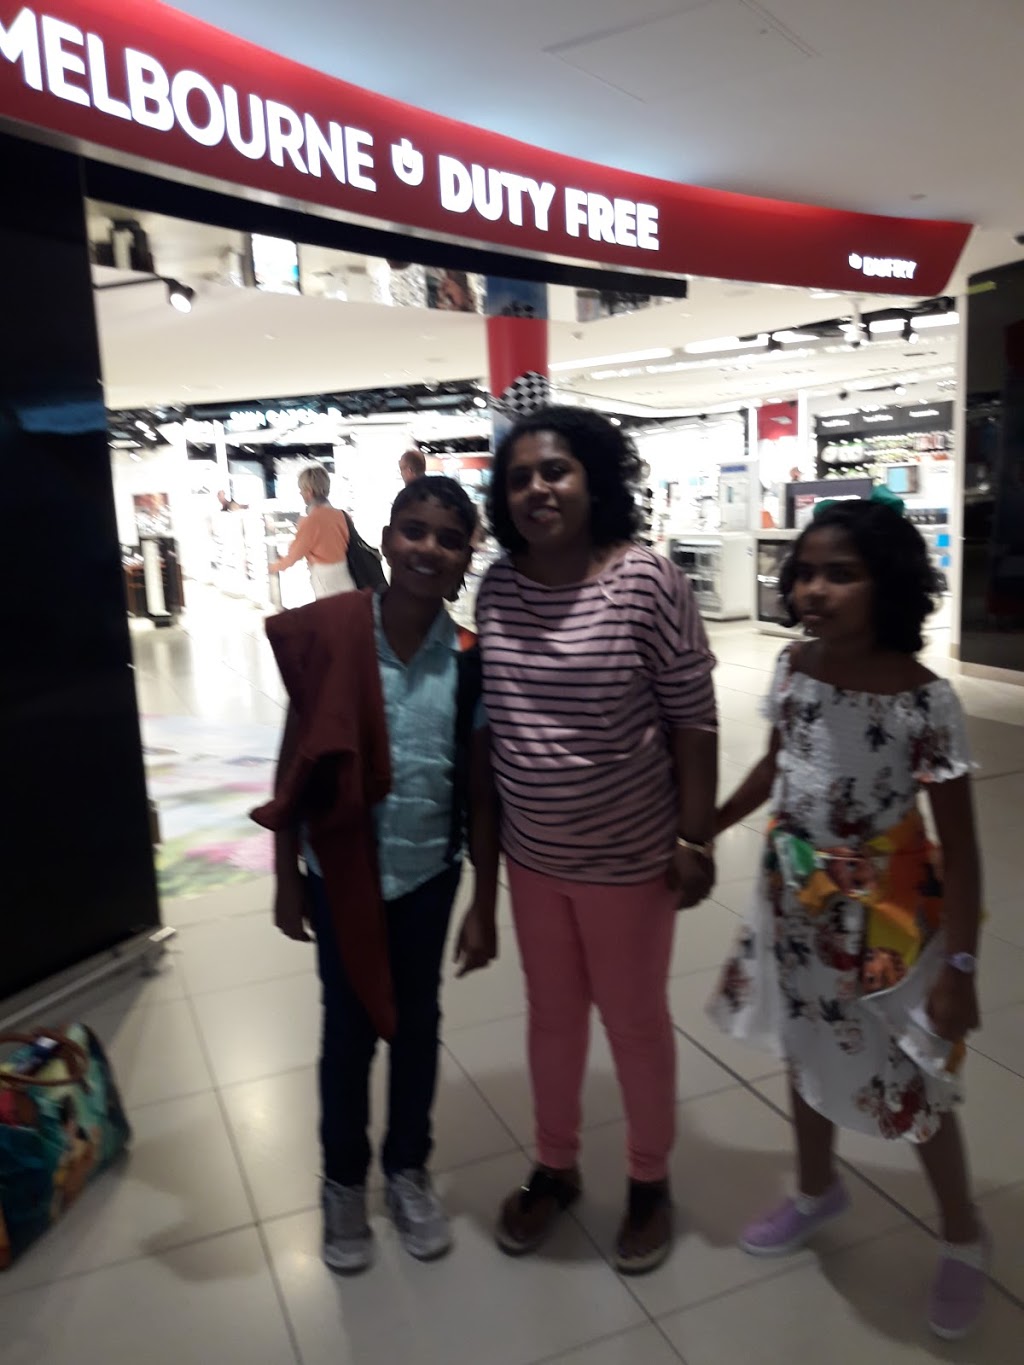 Dufry Duty Free Confectionery | store | T2, Melbourne Airport, VIC 3045, Australia